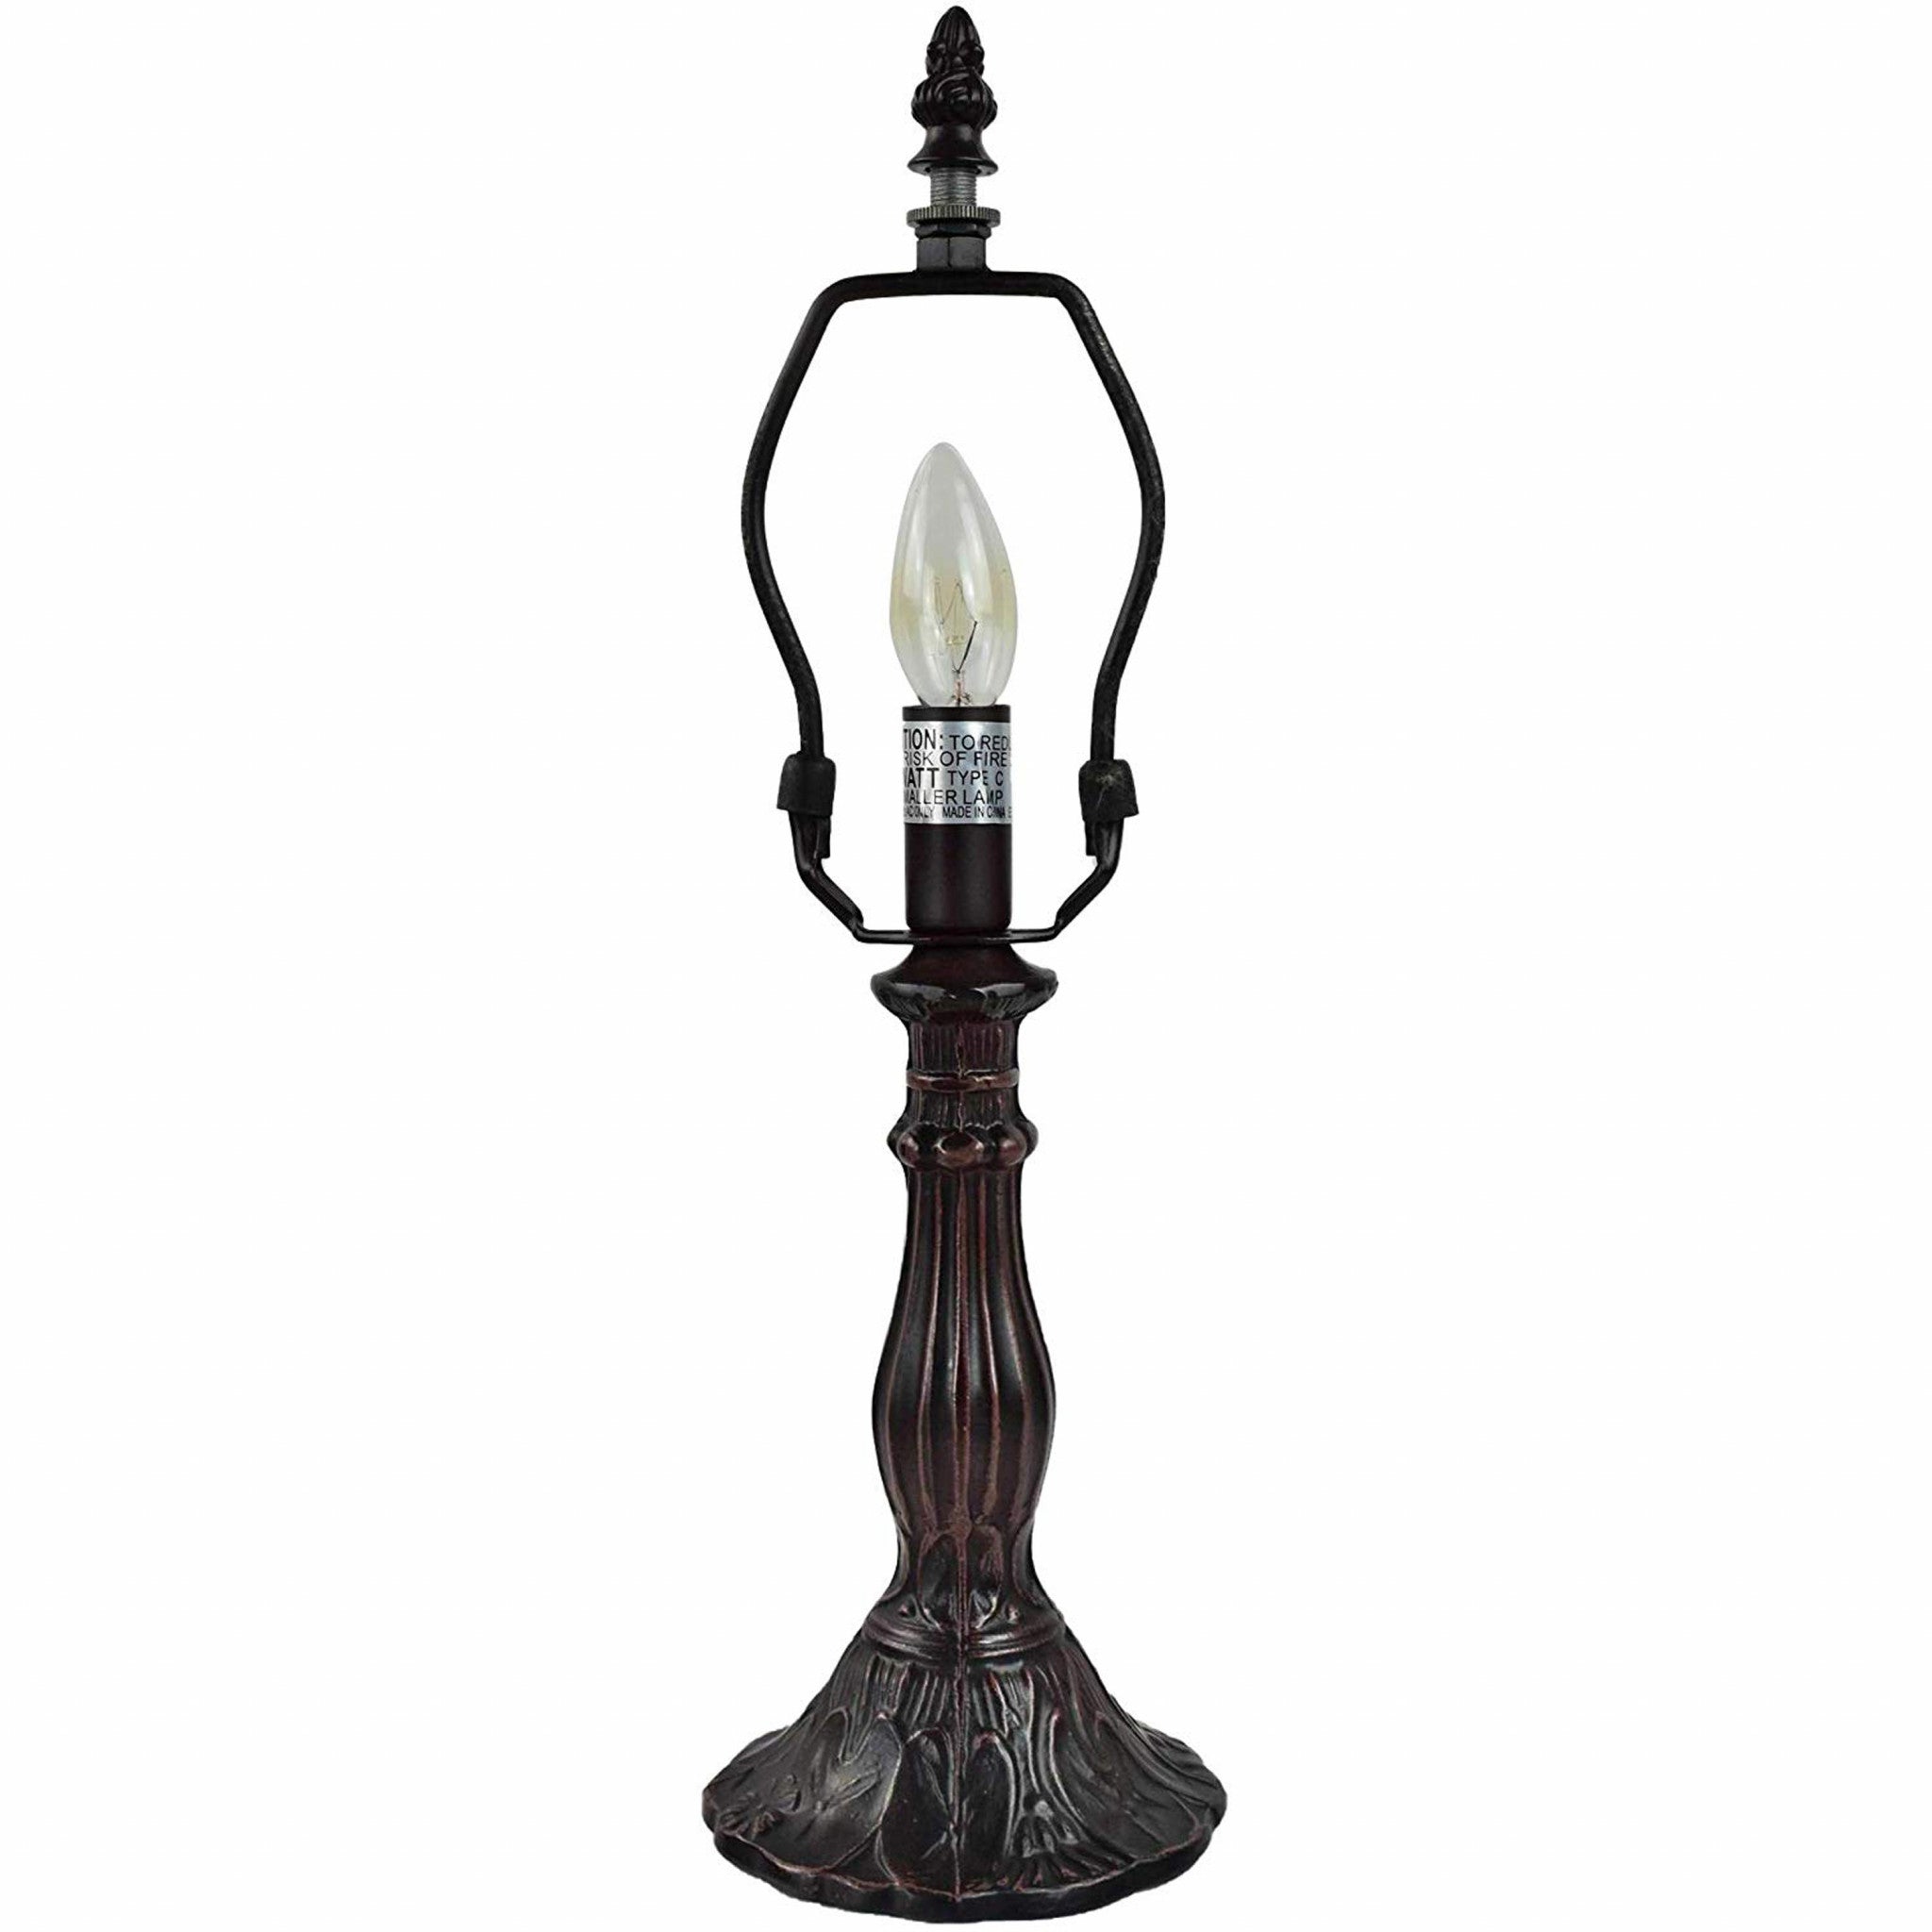 15" Dark Brown Metal Candlestick Table Lamp With Ivory Dome Shade